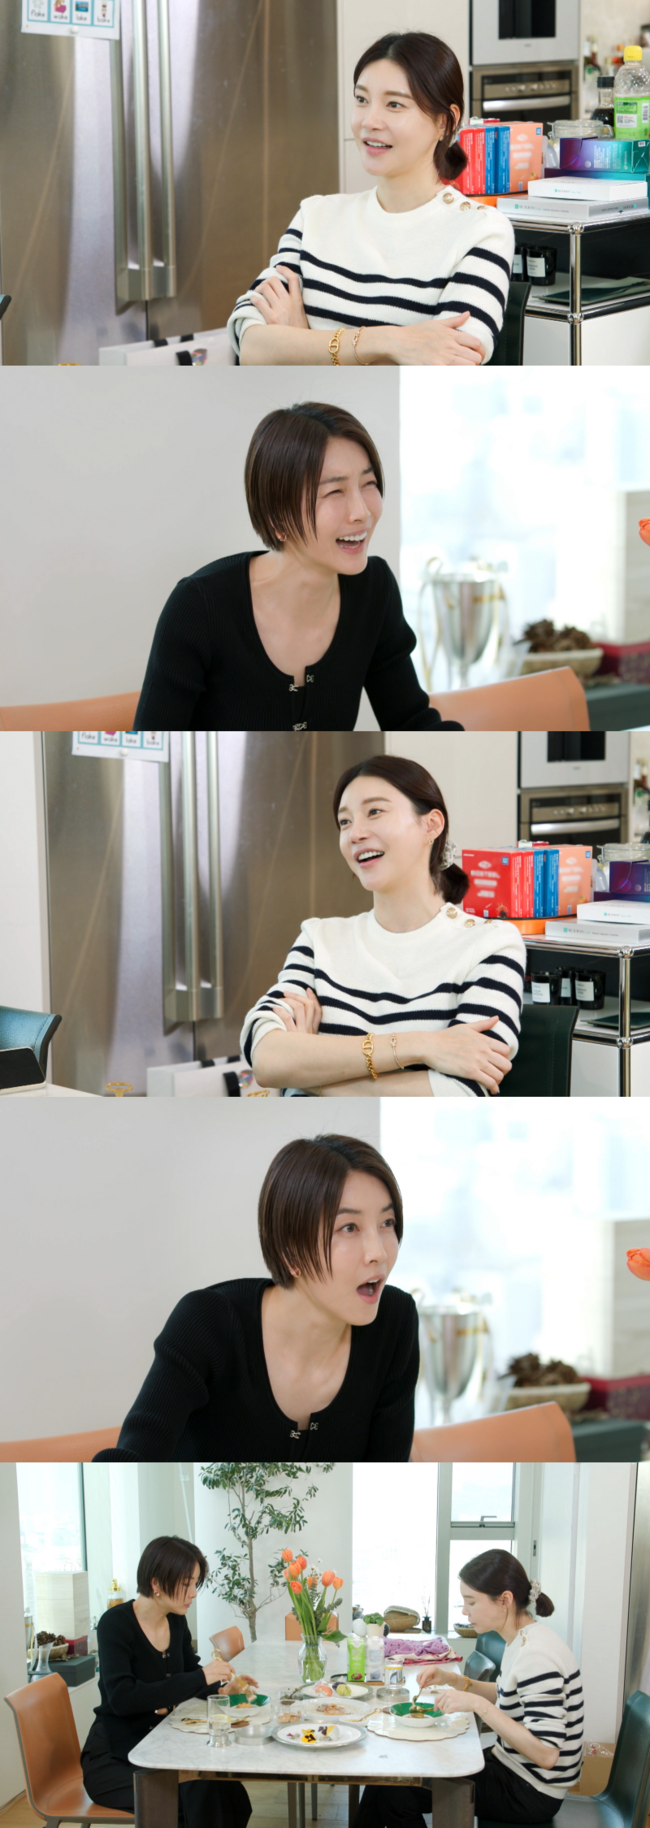 Actors Cha Ye-ryun and Jin Seo-yeon continue candid Husband talkOn June 23, KBS 2TV  ⁇ StarsStars Top Recipe at Fun-Staurant  ( ⁇ StarsStars Top Recipe at Fun-Staurant ), Cha Ye-ryun filmed the ENA drama Happy Battle and invited the familiar actress Jin Seo-yeon to her home to serve customized healthy dishes for Jin Seo-yeon.In the VCR, Cha Ye-ryun prepared healthy dishes for the best Jin Seo-yeon, including taste, health and visuals.Jin Seo-yeon In a custom dish, Jin Seo-yeon was proud of Cha Ye-ryun with impressive taste expression.Jin Seo-yeon found a wedding picture of Cha Ye-ryun X Ju Sang Wook in the window and said, Its so pretty. Its like a picture of a drama props.Cha Ye-ryun X Ju Sang Wook affluent A brilliant visual captures the eye.Jin Seo-yeon asked Cha Ye-ryun, Ju Sang Wook is so handsome. Honestly, is not it Anxiety?In Jin Seo-yeons question,  ⁇ StarsStars Top Recipe at Fun-Staurant  Family members also noted what Cha Ye-ryun would answer.At this time, Cha Ye-ryun is surprised to hear that it is known to have made  ⁇  Stars Top Recipe at Fun-Staurant  ⁇  studio into Laughter sea.